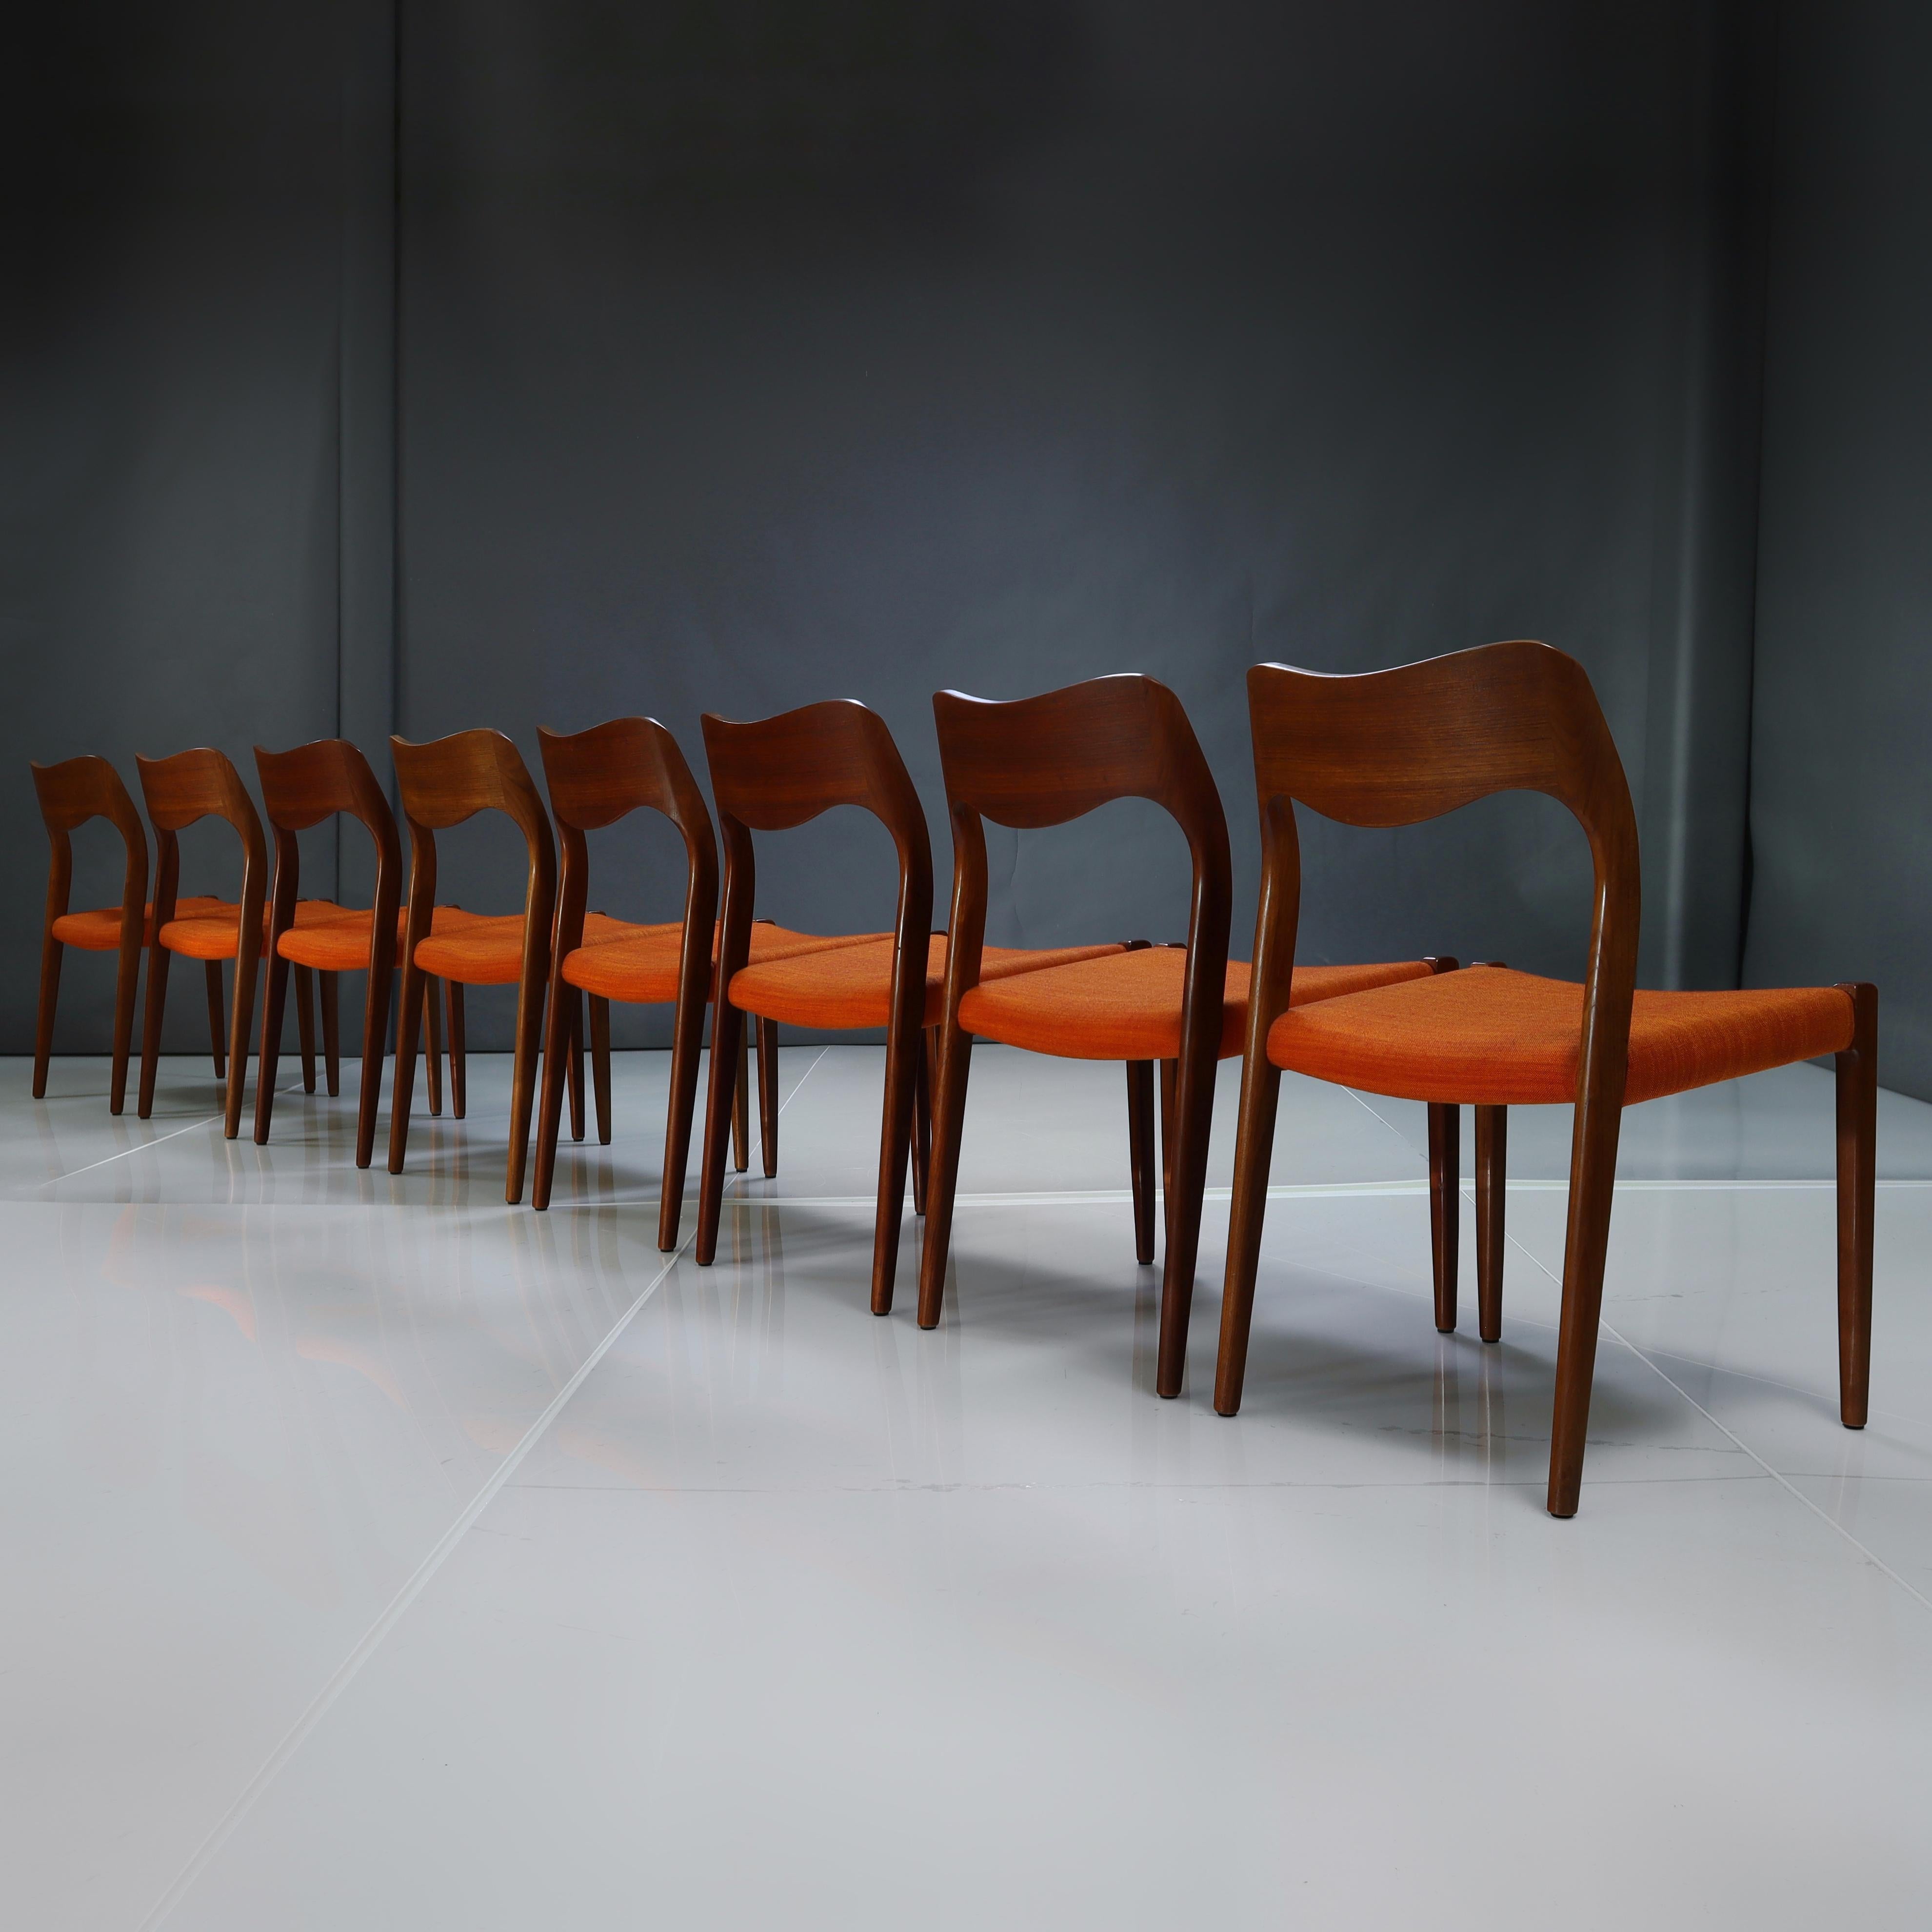 **If order is placed before Oct 31st, we will ensure to have these delivered before Nov 23rd.**

Step into a world where timeless elegance meets Danish craftsmanship with this exquisite set of 8 Vintage Danish Dining Chairs designed by Niels Møller.